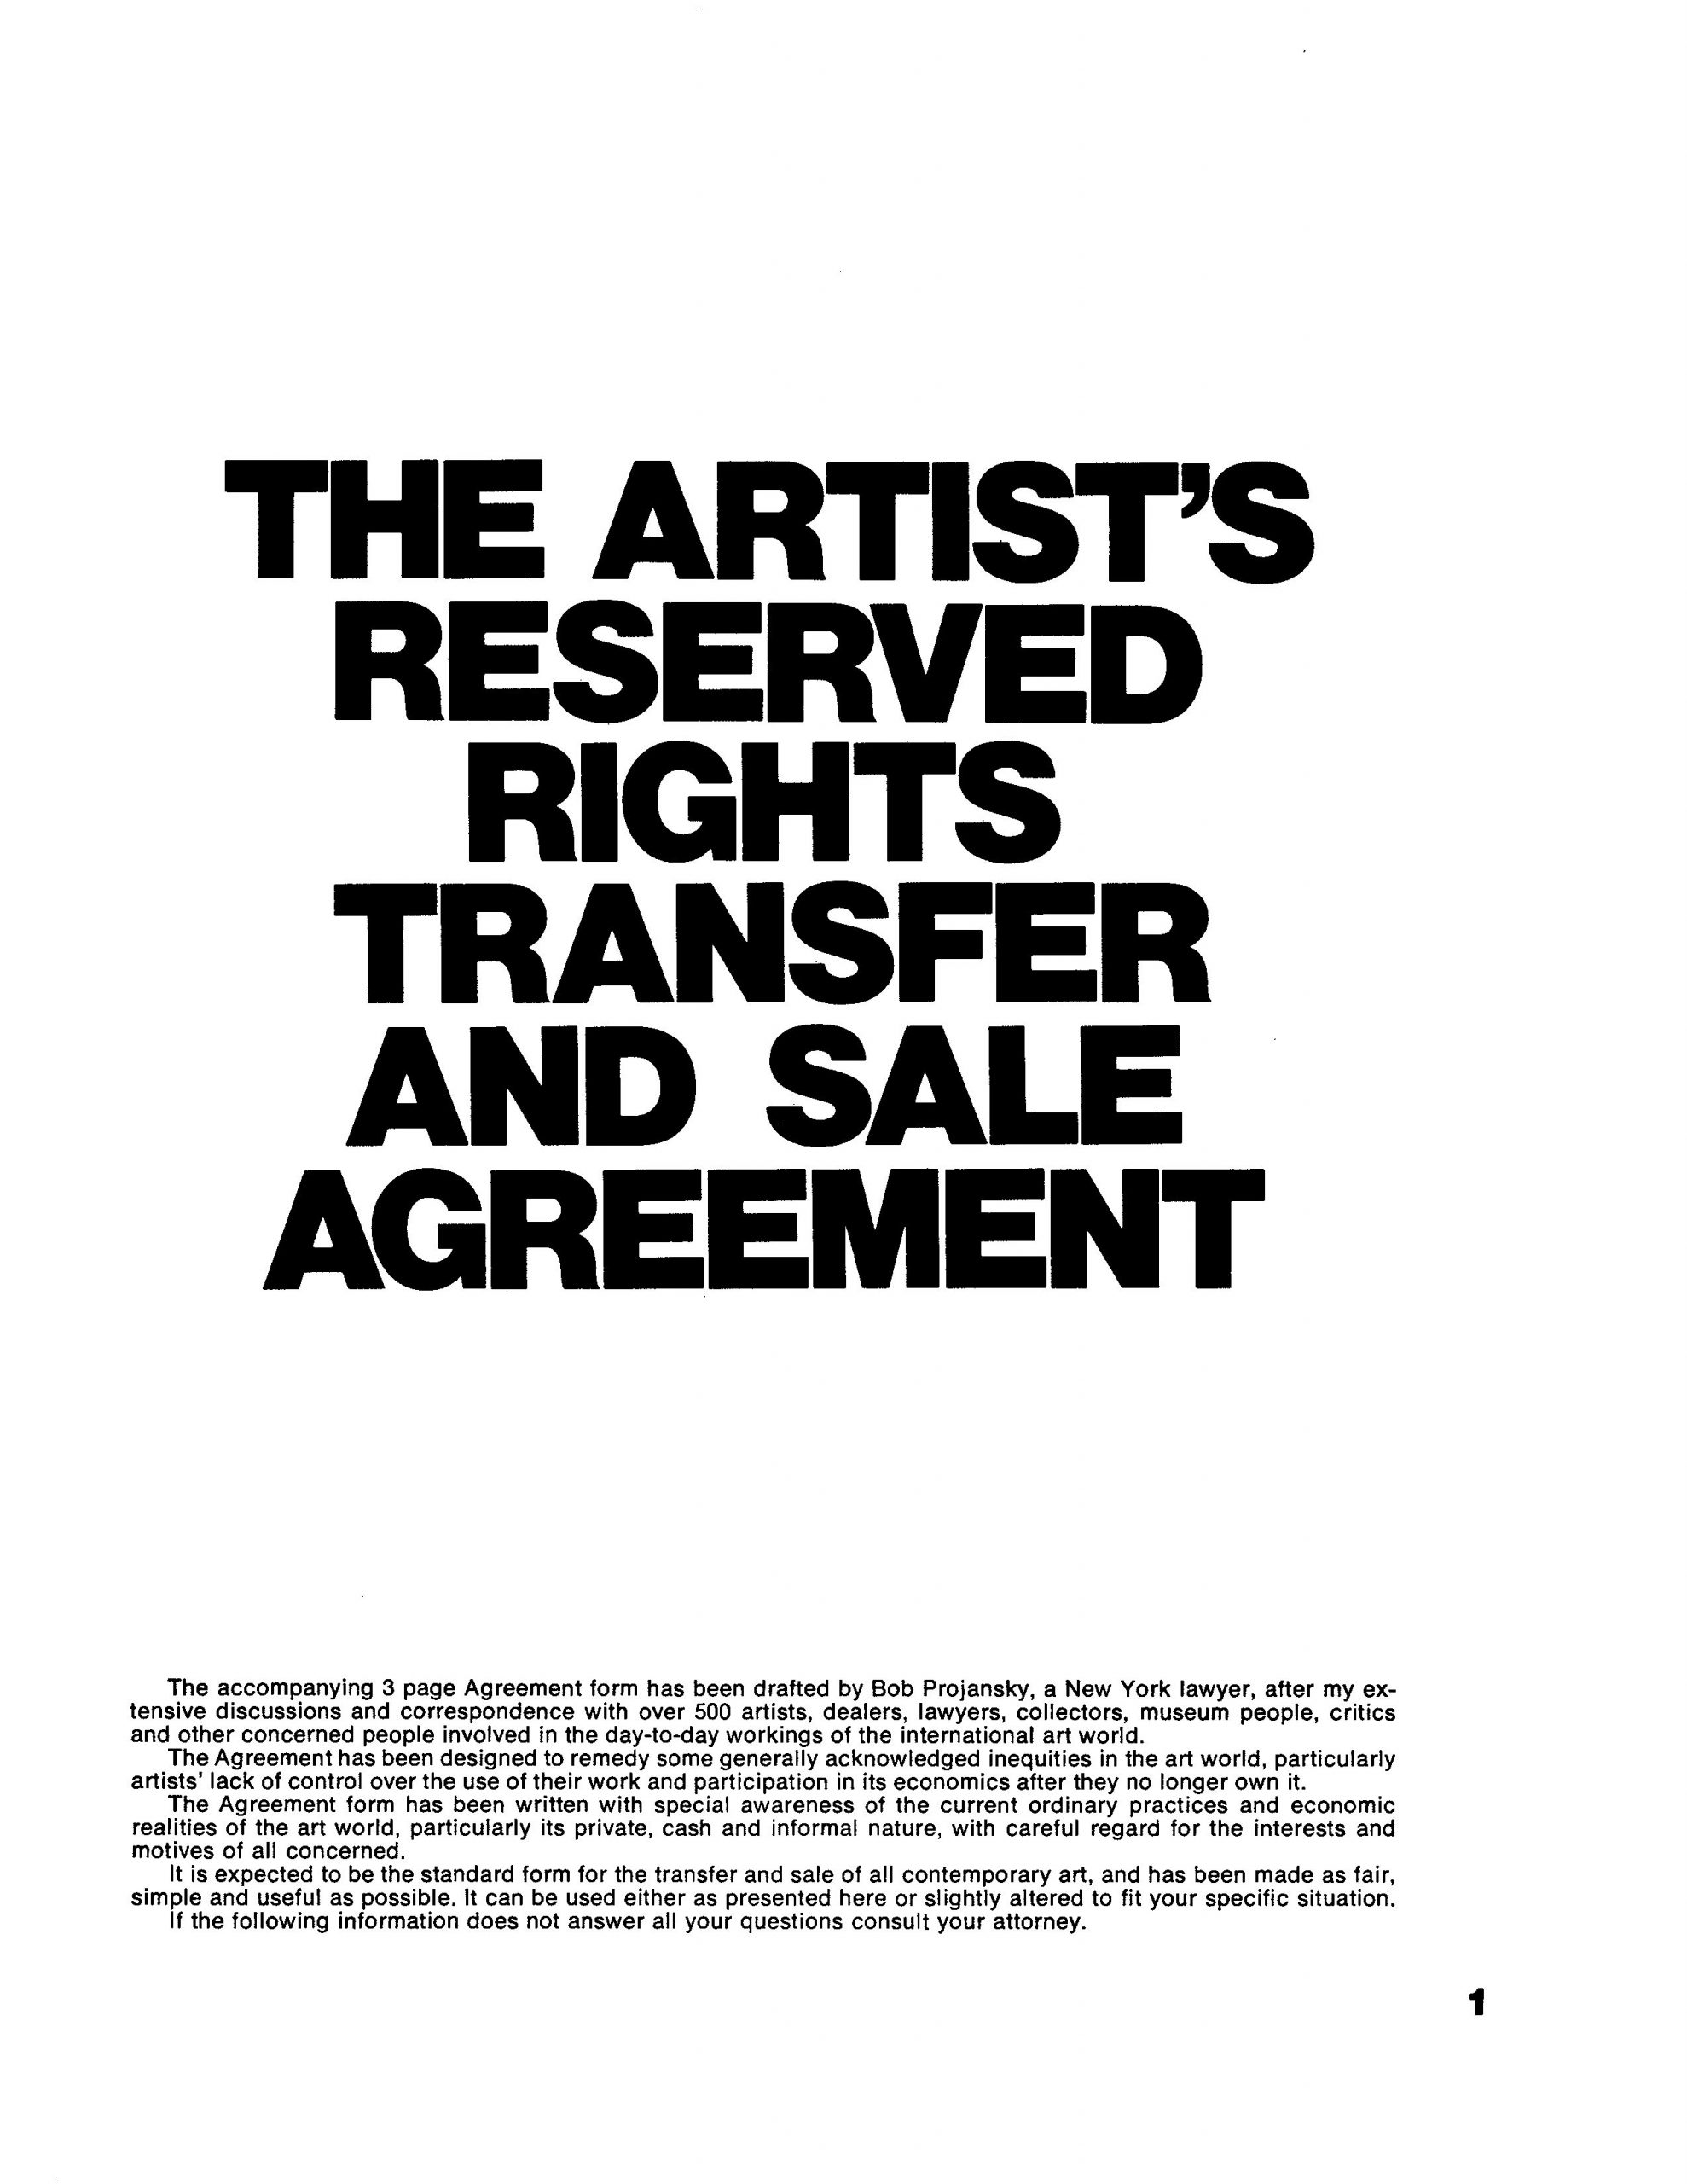 Seth Siegelaub, Robert Projansky, The Artists Reserved Rights Transfer and Sale Agreement (1971)